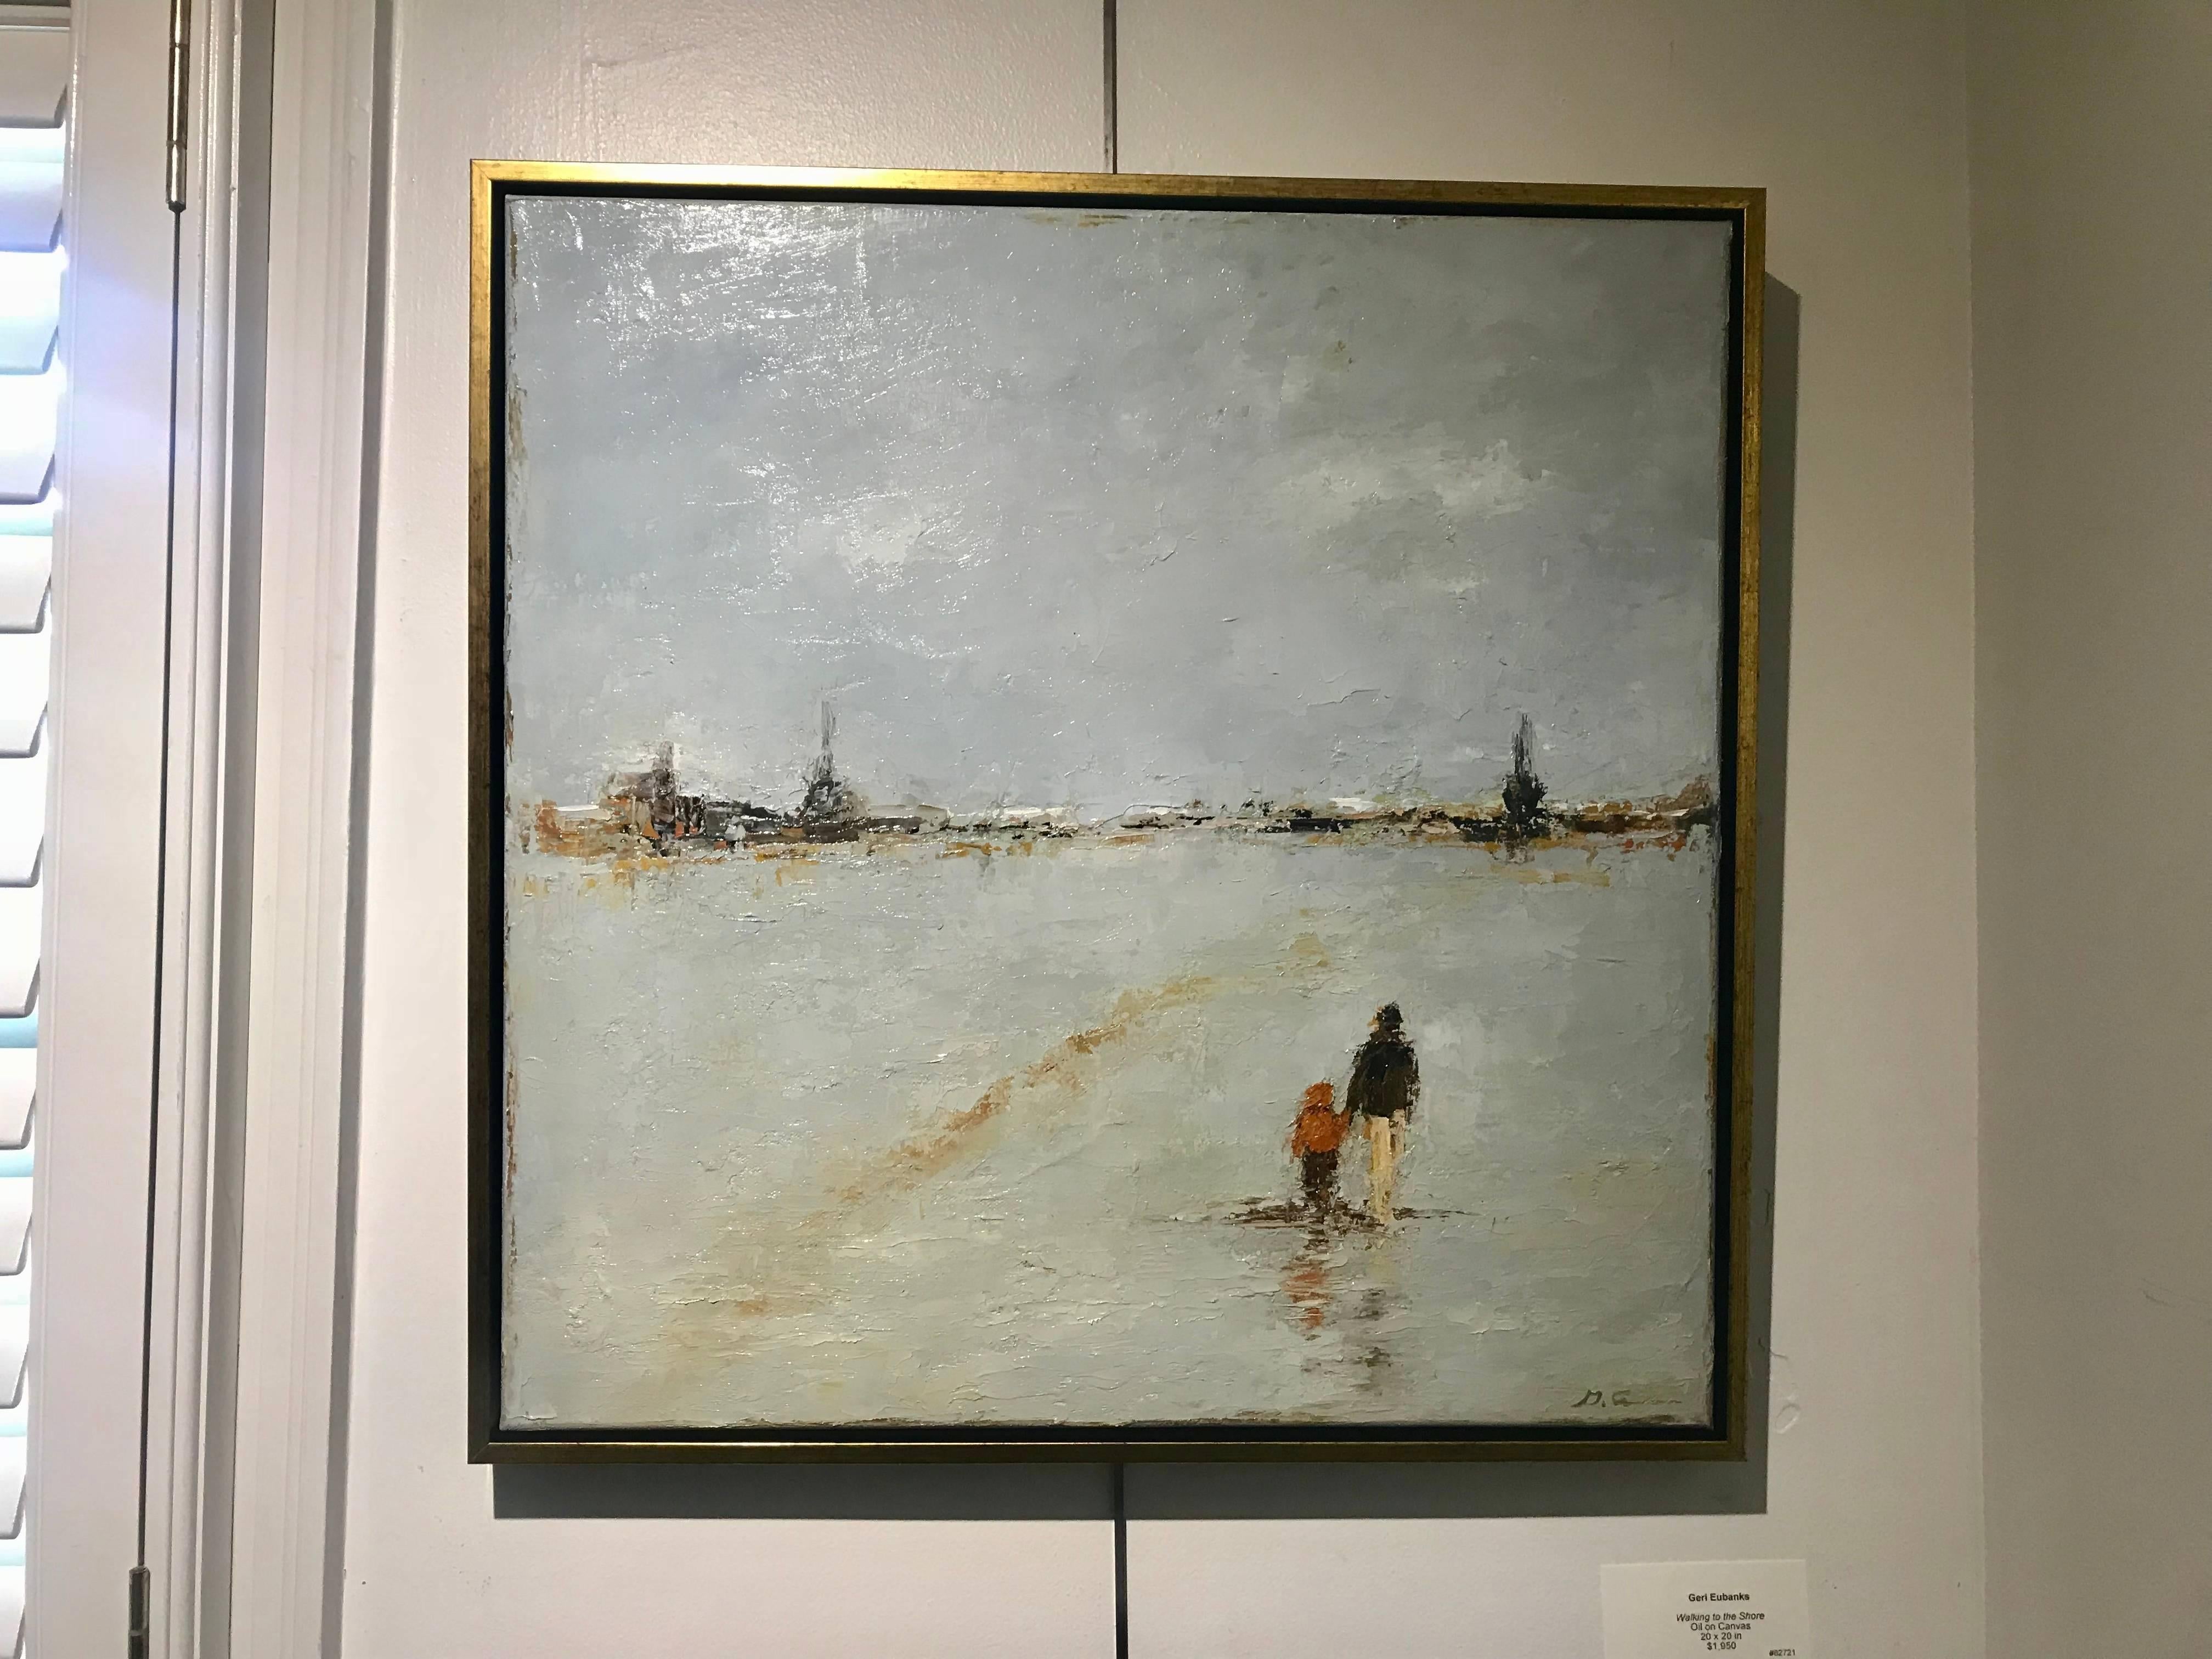 'Walking to the Shore' is a framed square format Impressionist oil on canvas painting created by American artist Geri Eubanks in 2018. Two characters, an adult and a child, are walking along a shore. The child's hood, along with the grey sky,